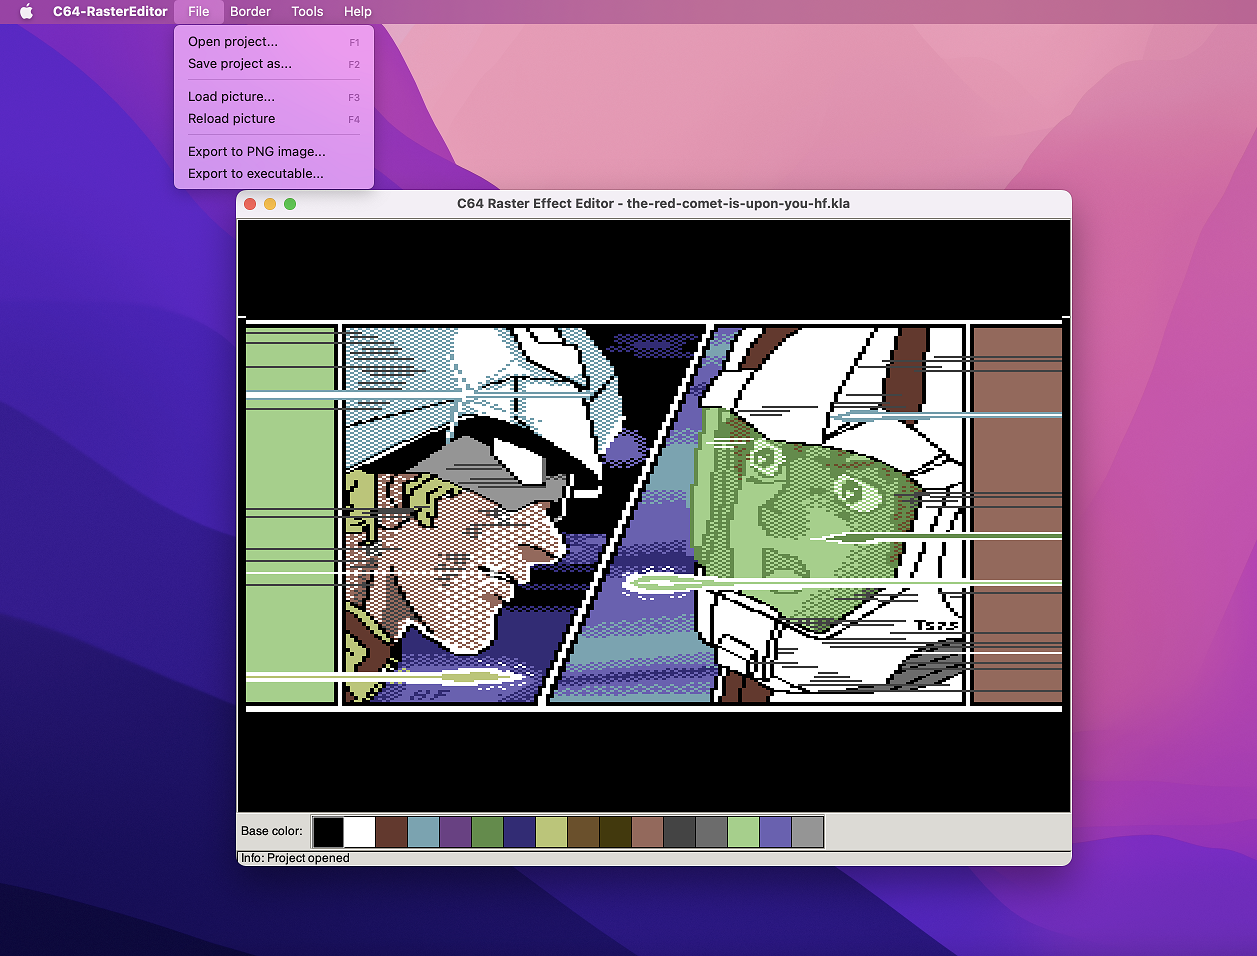 C64 Raster Effect Editor on macOS: The Red Comet Is Upon You by Titus75